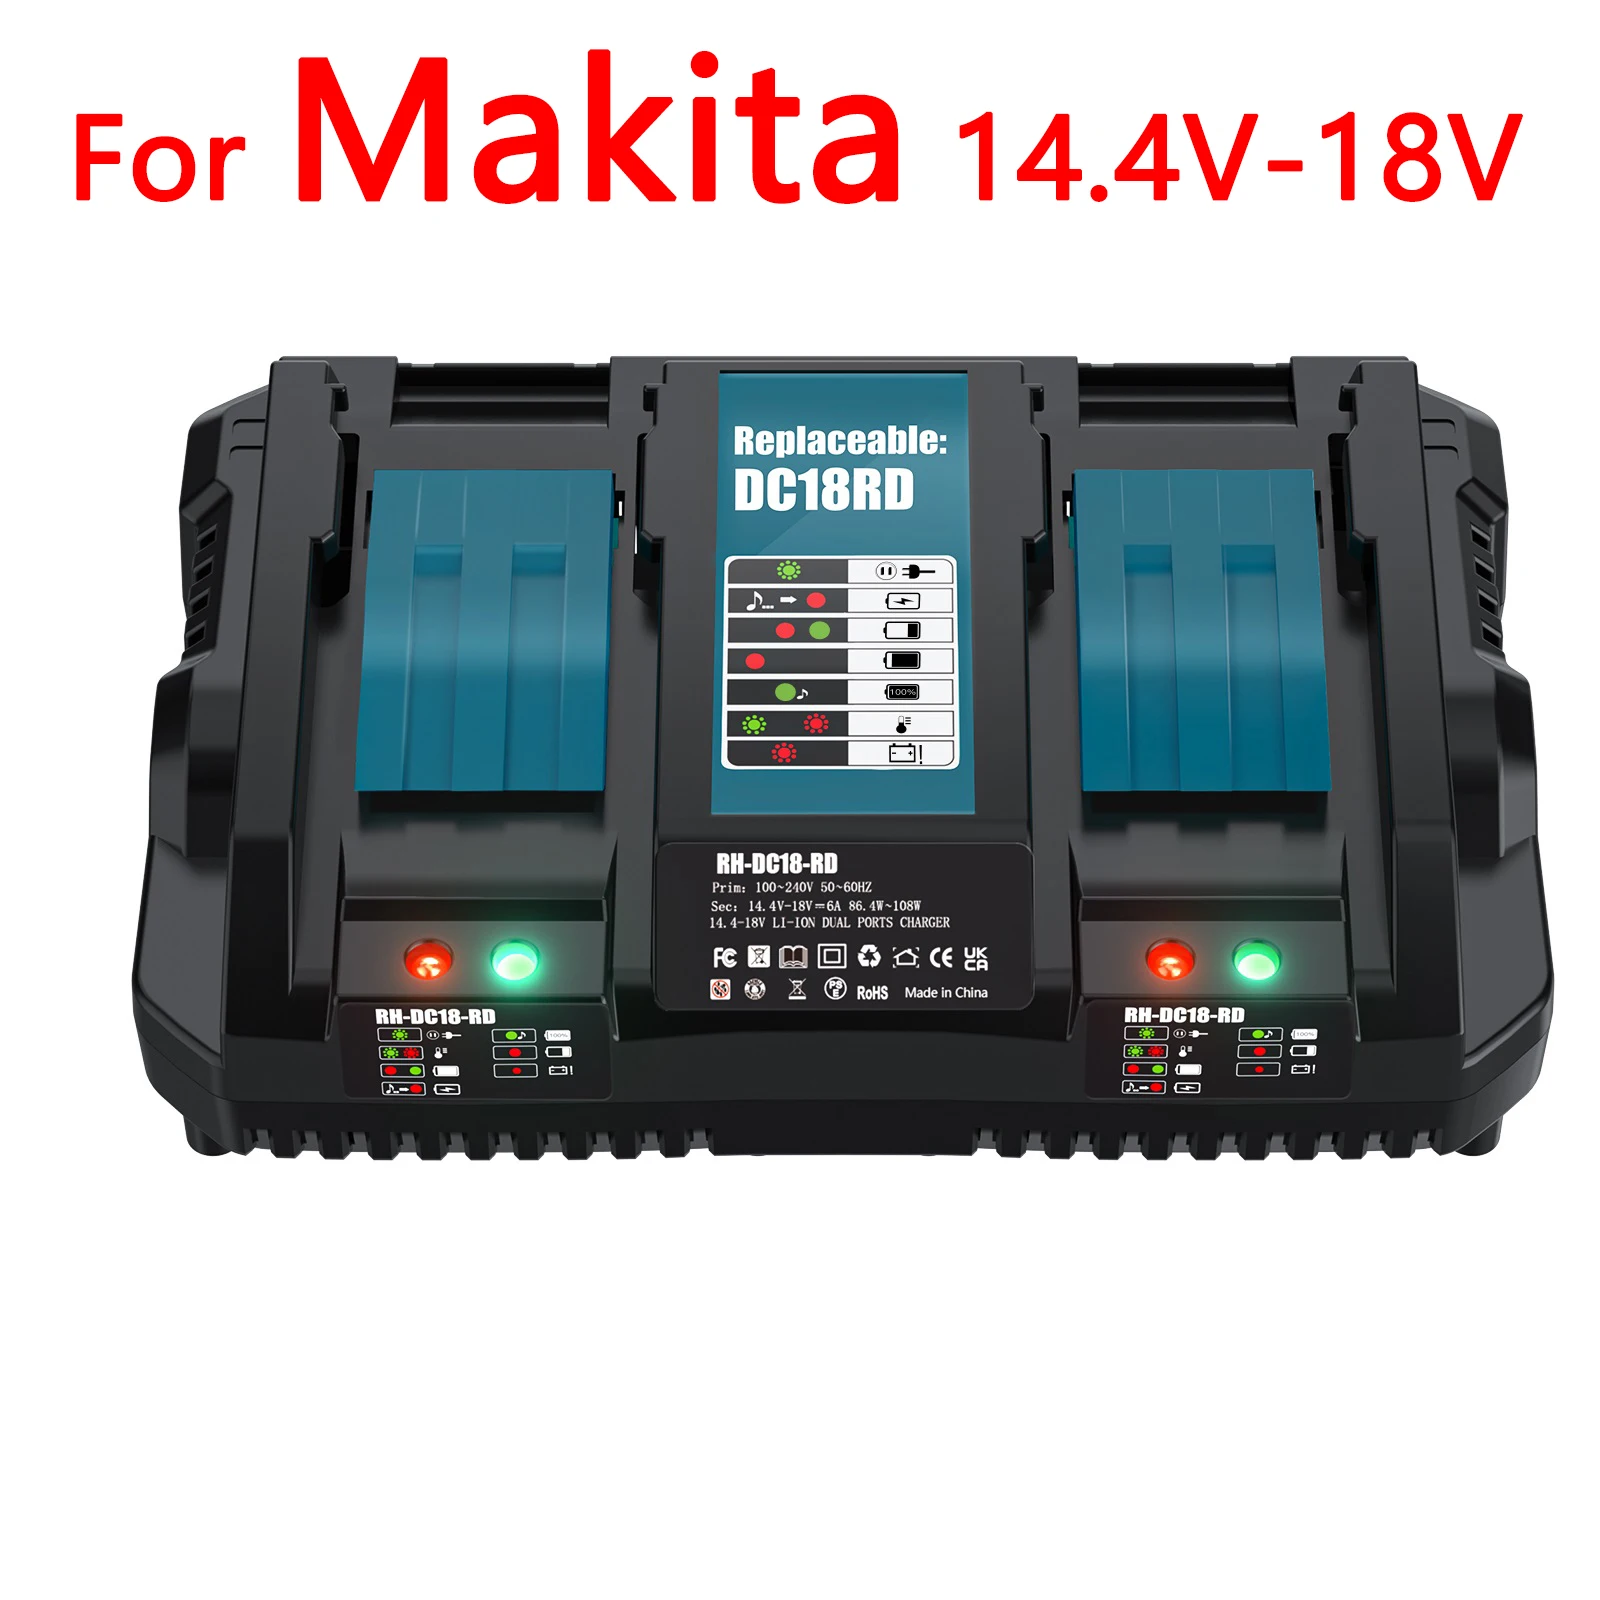 

Battery Charger 18V Makita Battery BL1830 BL1430 BL1840 1850 1860 1890 14.4v 18v 3A 6A Electric Power Tool Charger